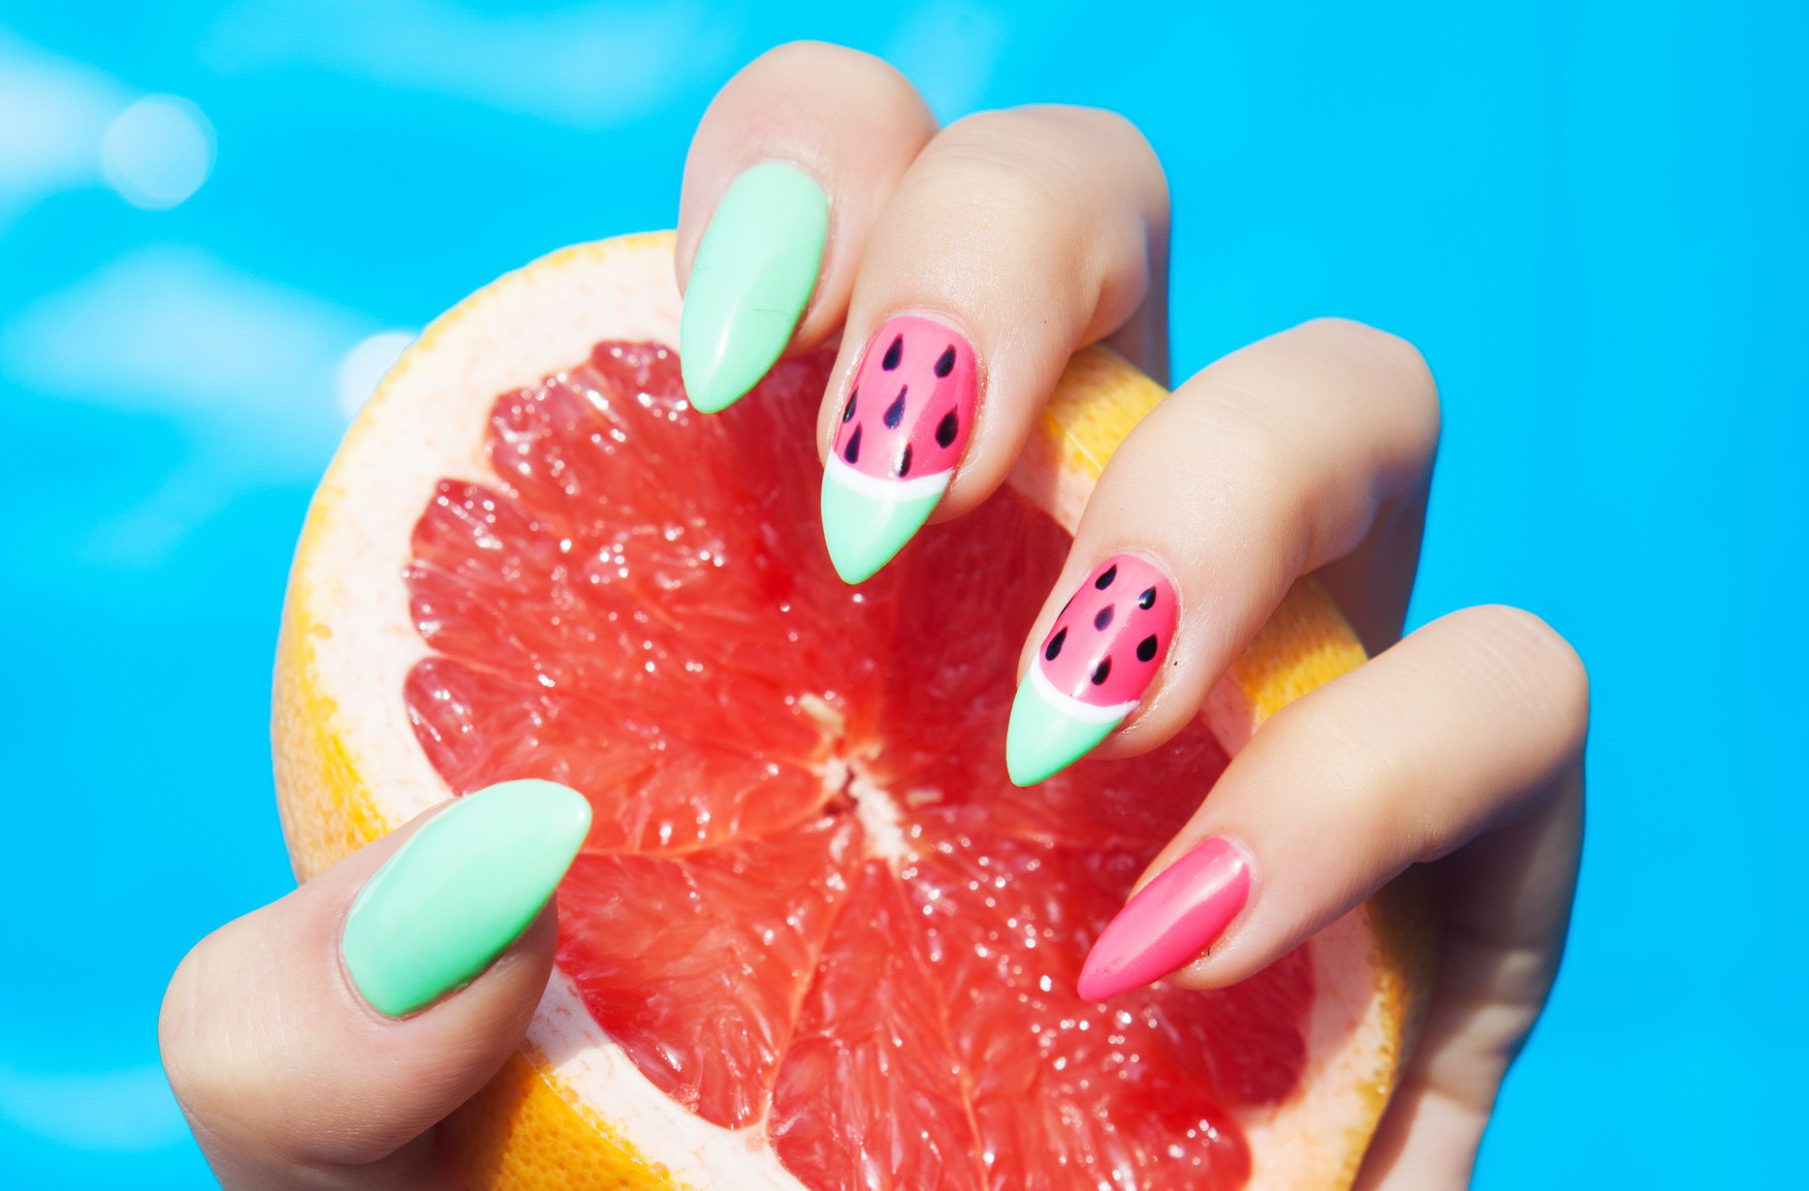 Amazon.com: Flywindy Fruit Nail Art Sticker 12 Sheets Nail Water Transfer  Decals Watermelon Lemon Strawberry Cherry Peach Patterns Cool Summer Nail  Accessories Decorations Nail Supplies (12) : Beauty & Personal Care